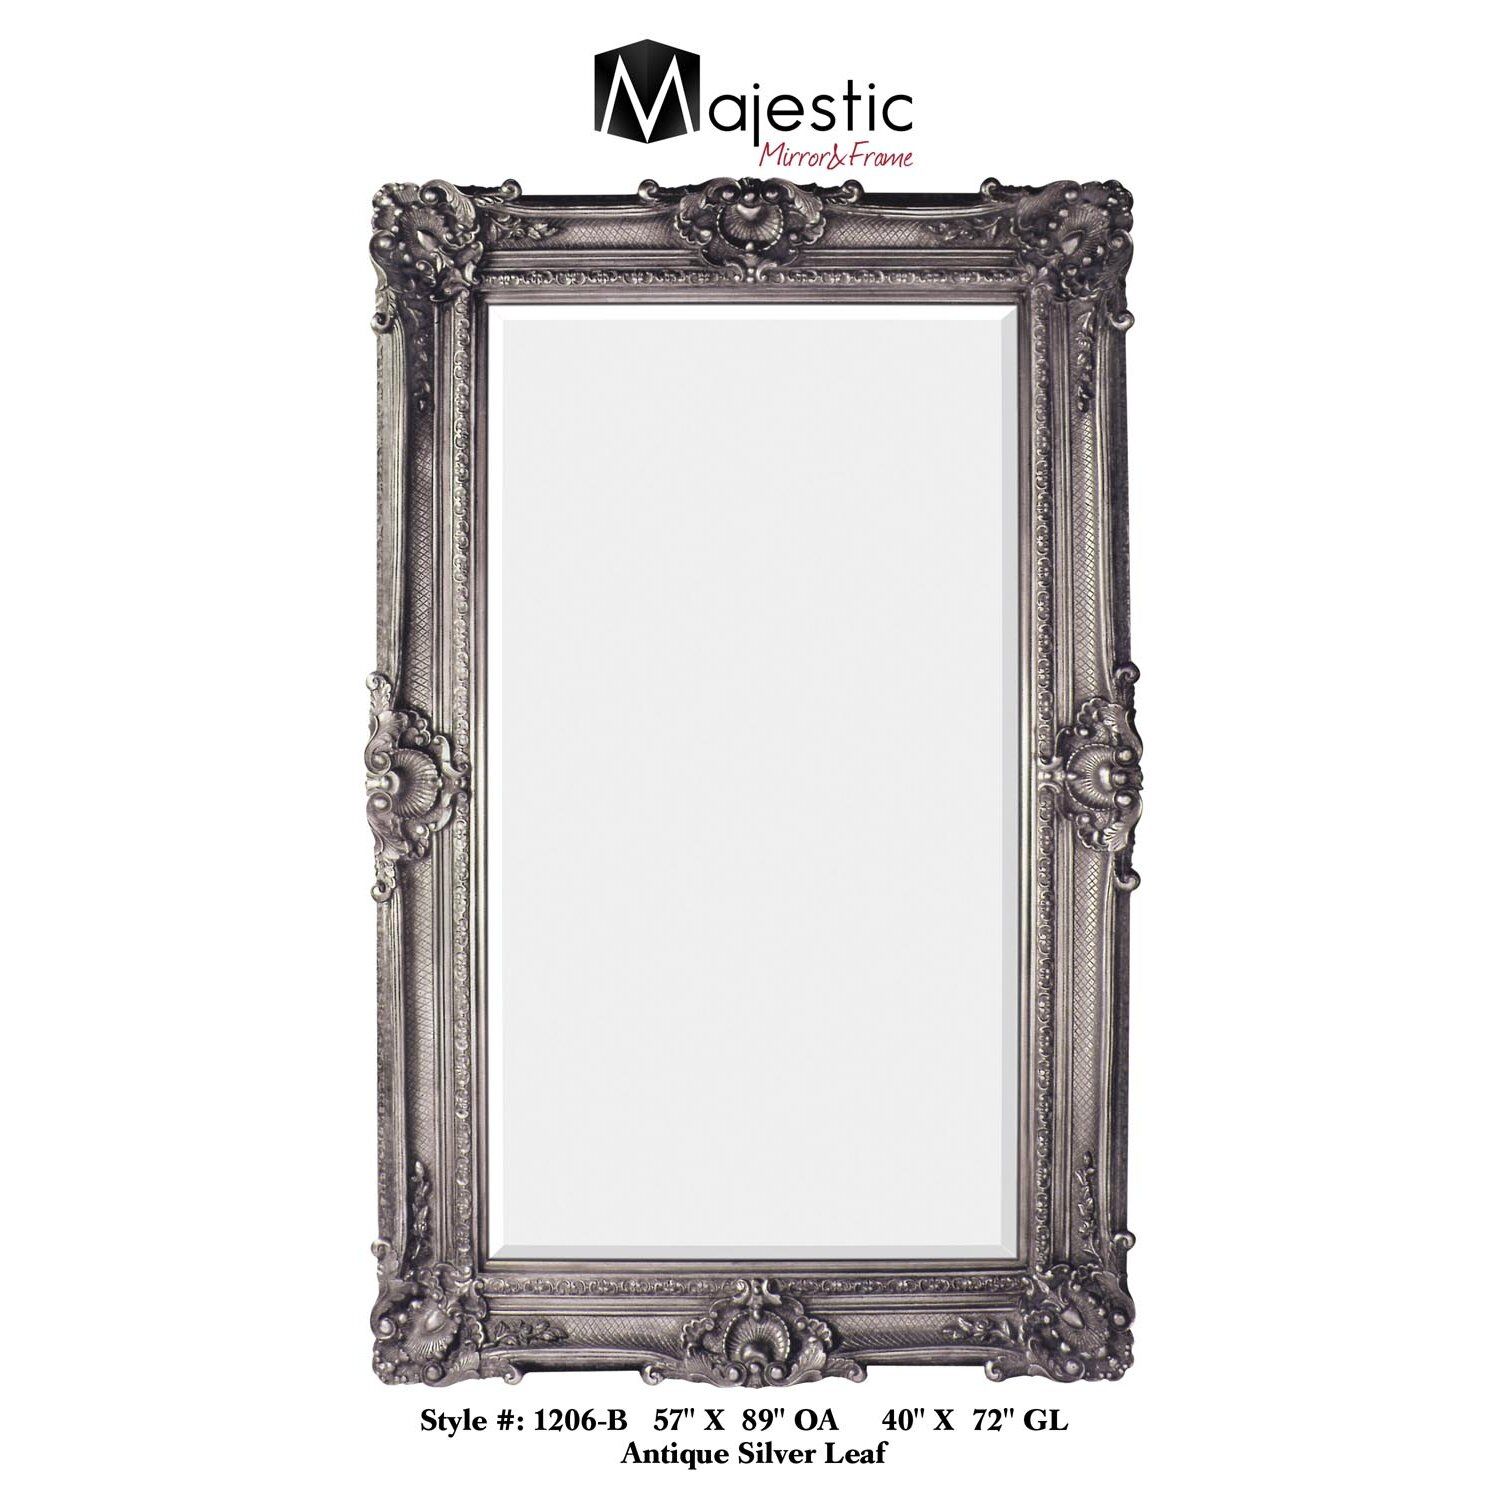 Majestic Mirror Antique Silver Leaf Finish Traditional Framed Beveled In Metallic Gold Leaf Wall Mirrors (View 15 of 15)